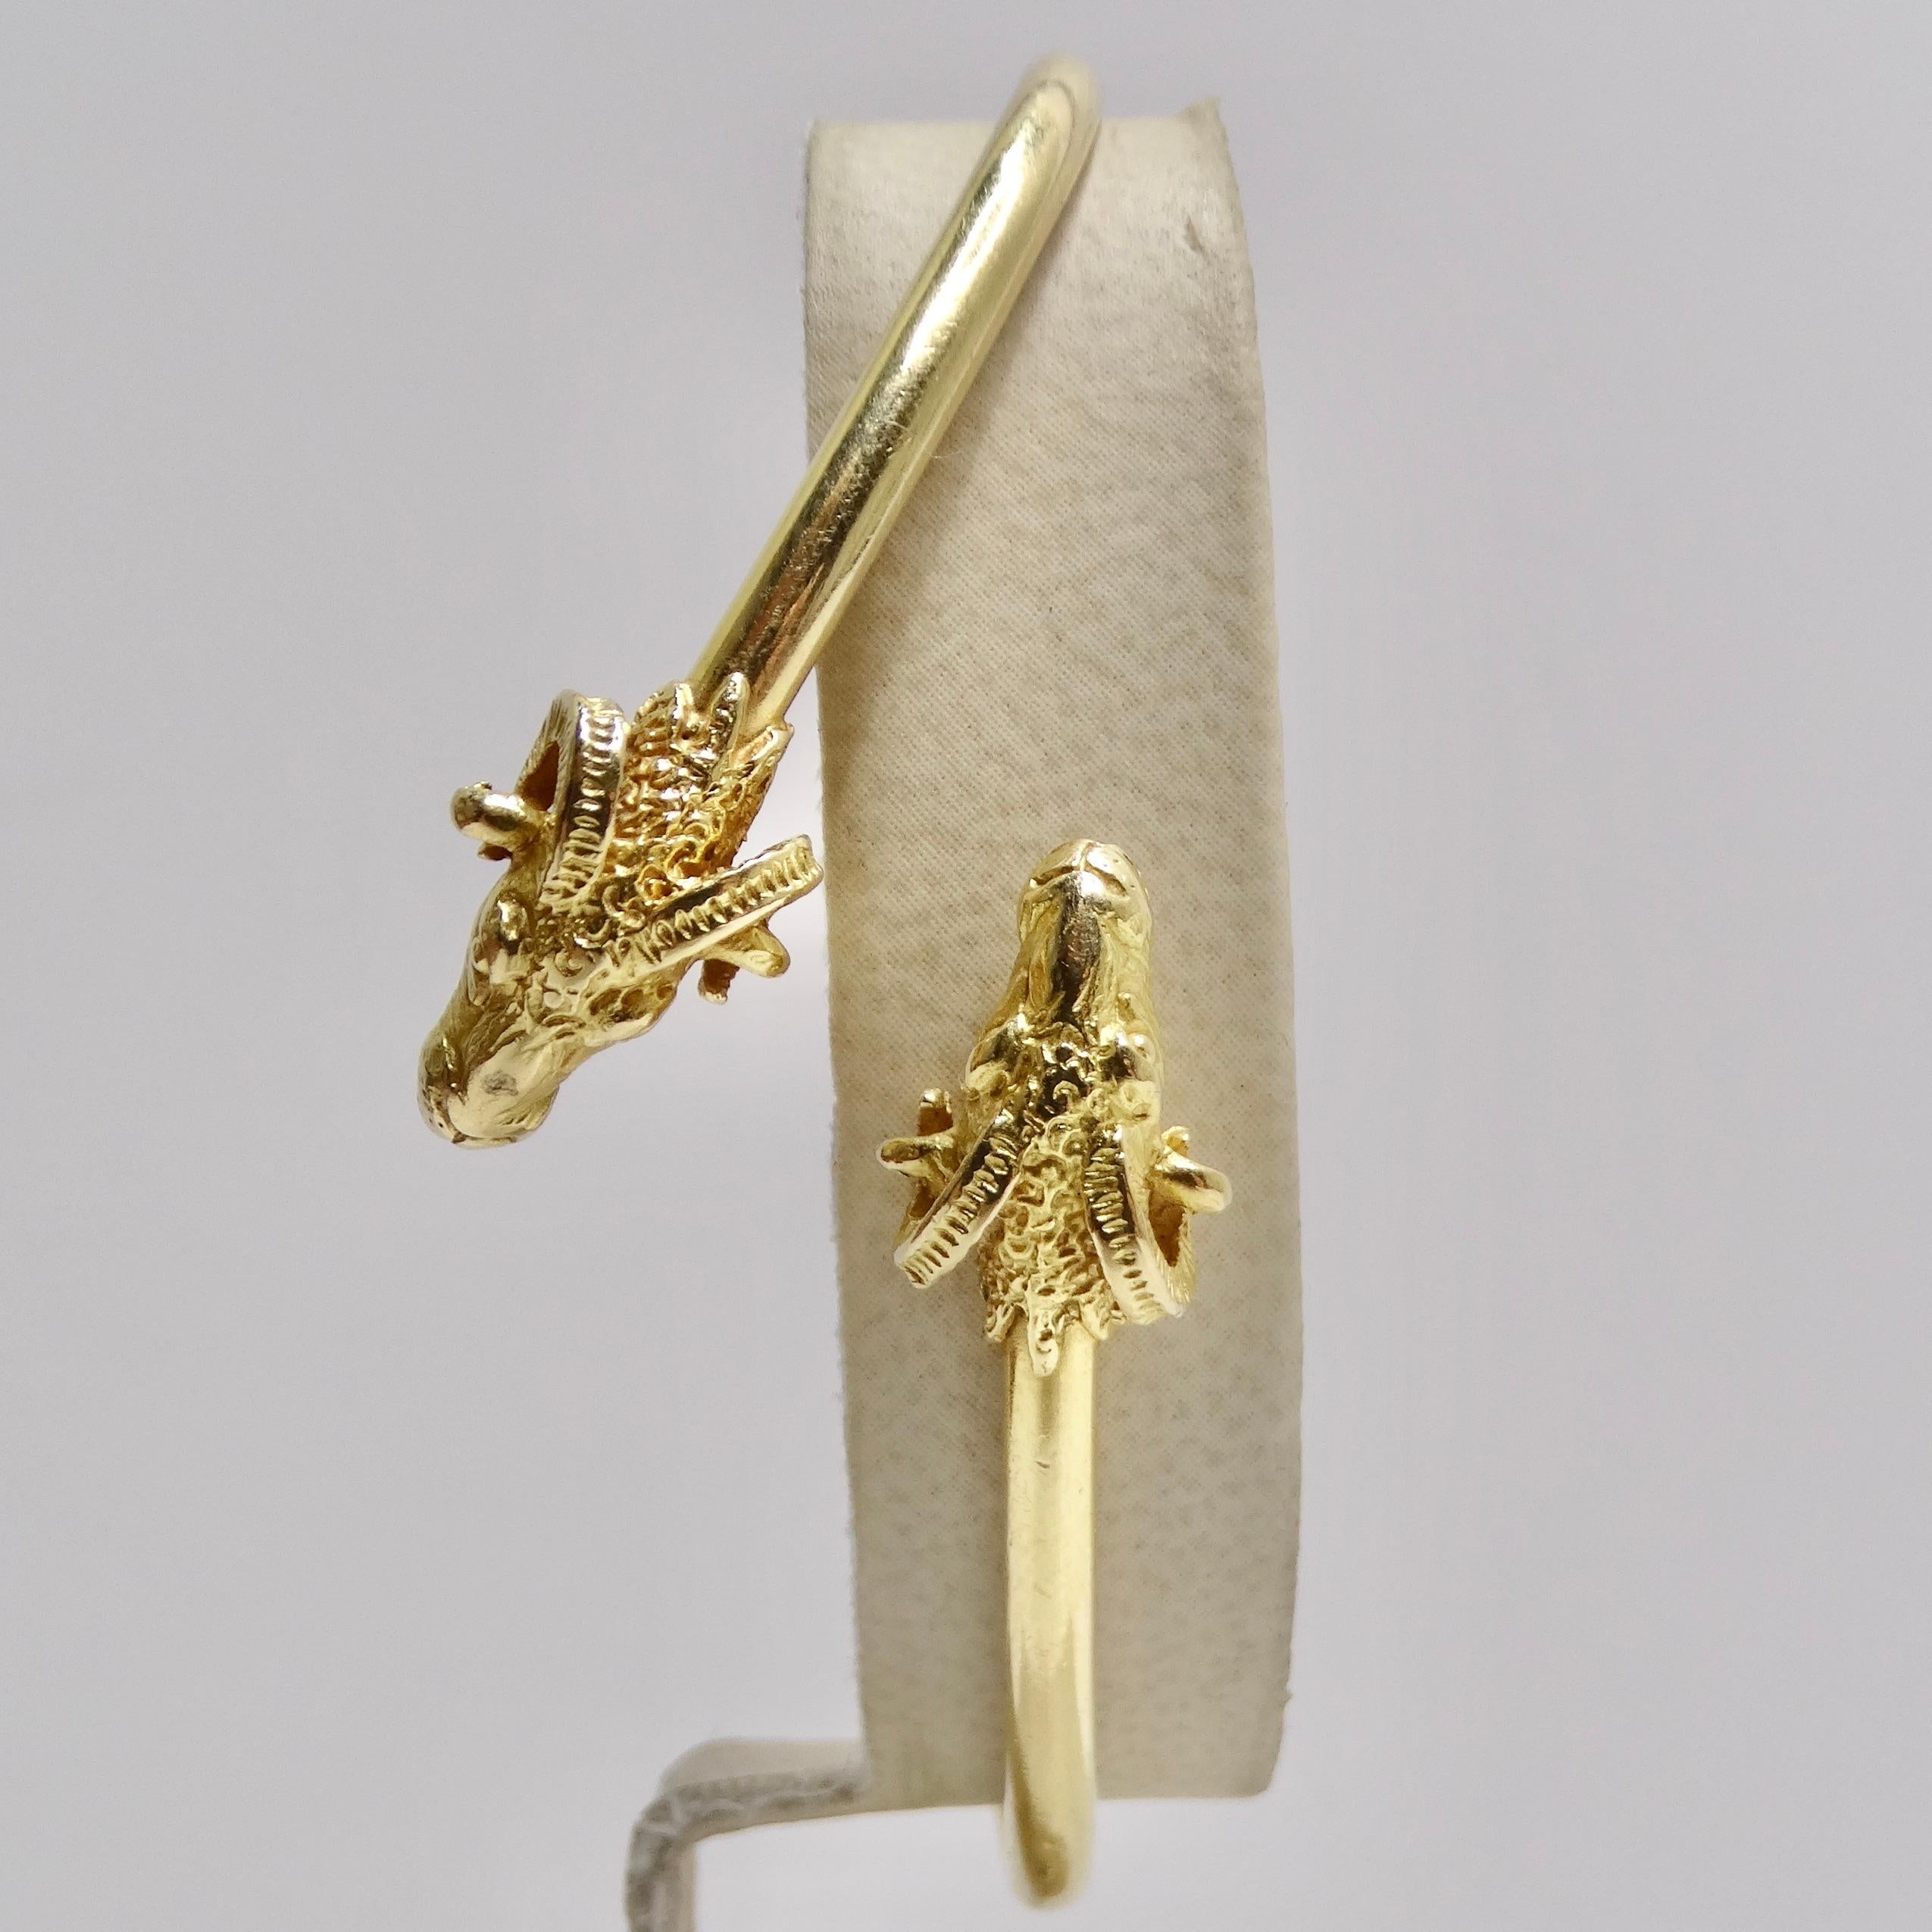 Introducing the 18K Solid Gold 1960s Ram Head Cuff Bracelet—a luxurious and artfully crafted piece that showcases the elegance of 18k yellow gold. This cuff bracelet is not merely an accessory; it's a wearable masterpiece, meticulously designed with